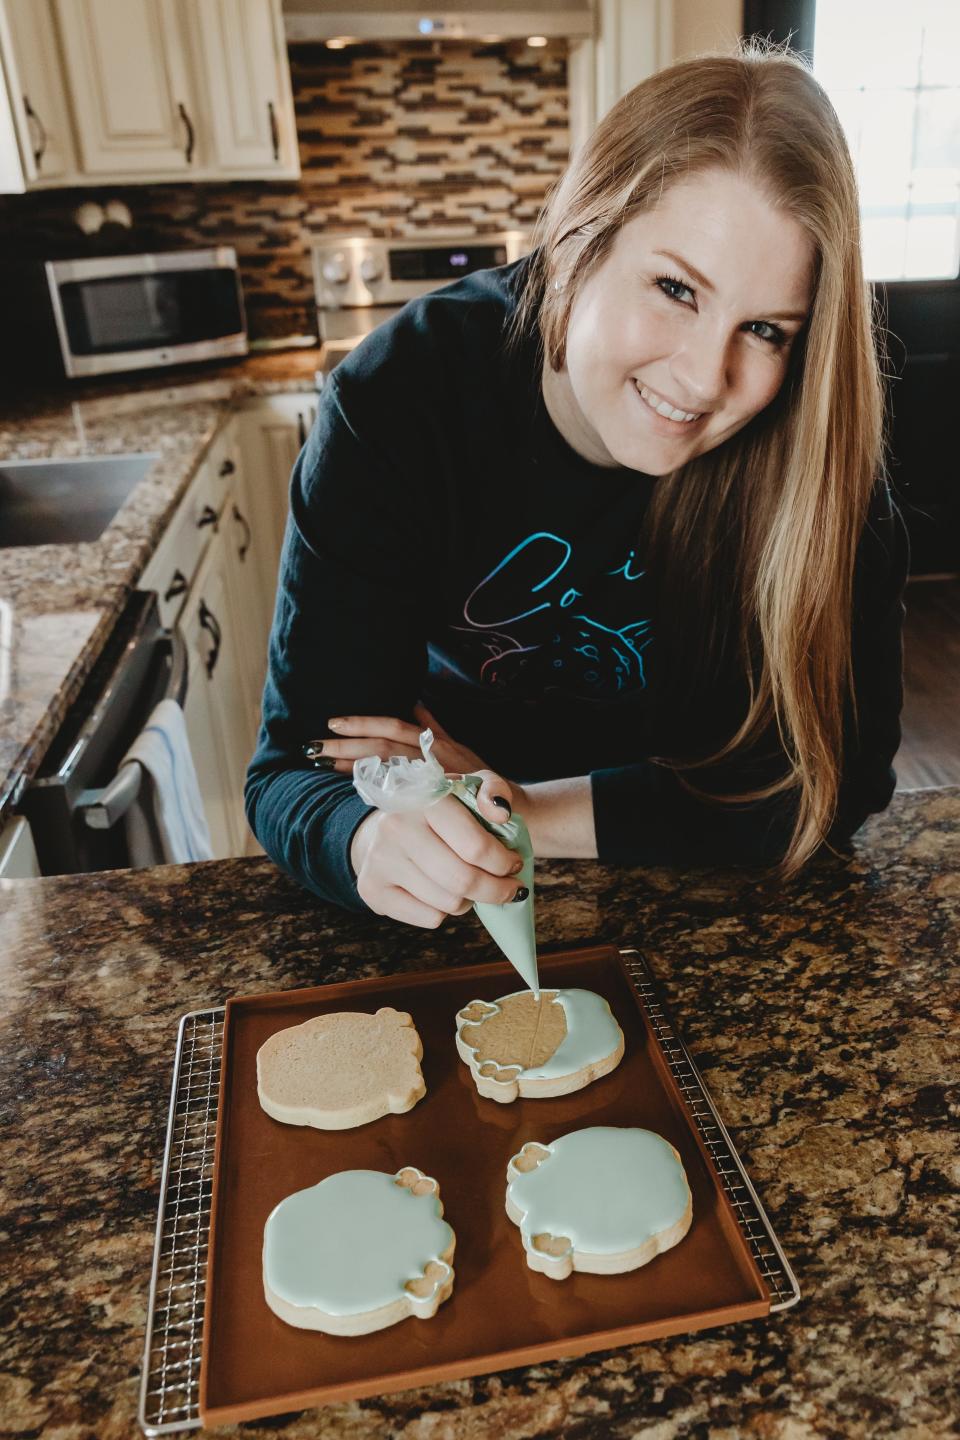 After watching cookie decorating videos on social media, Bethany Bruni of Newport started making her own.